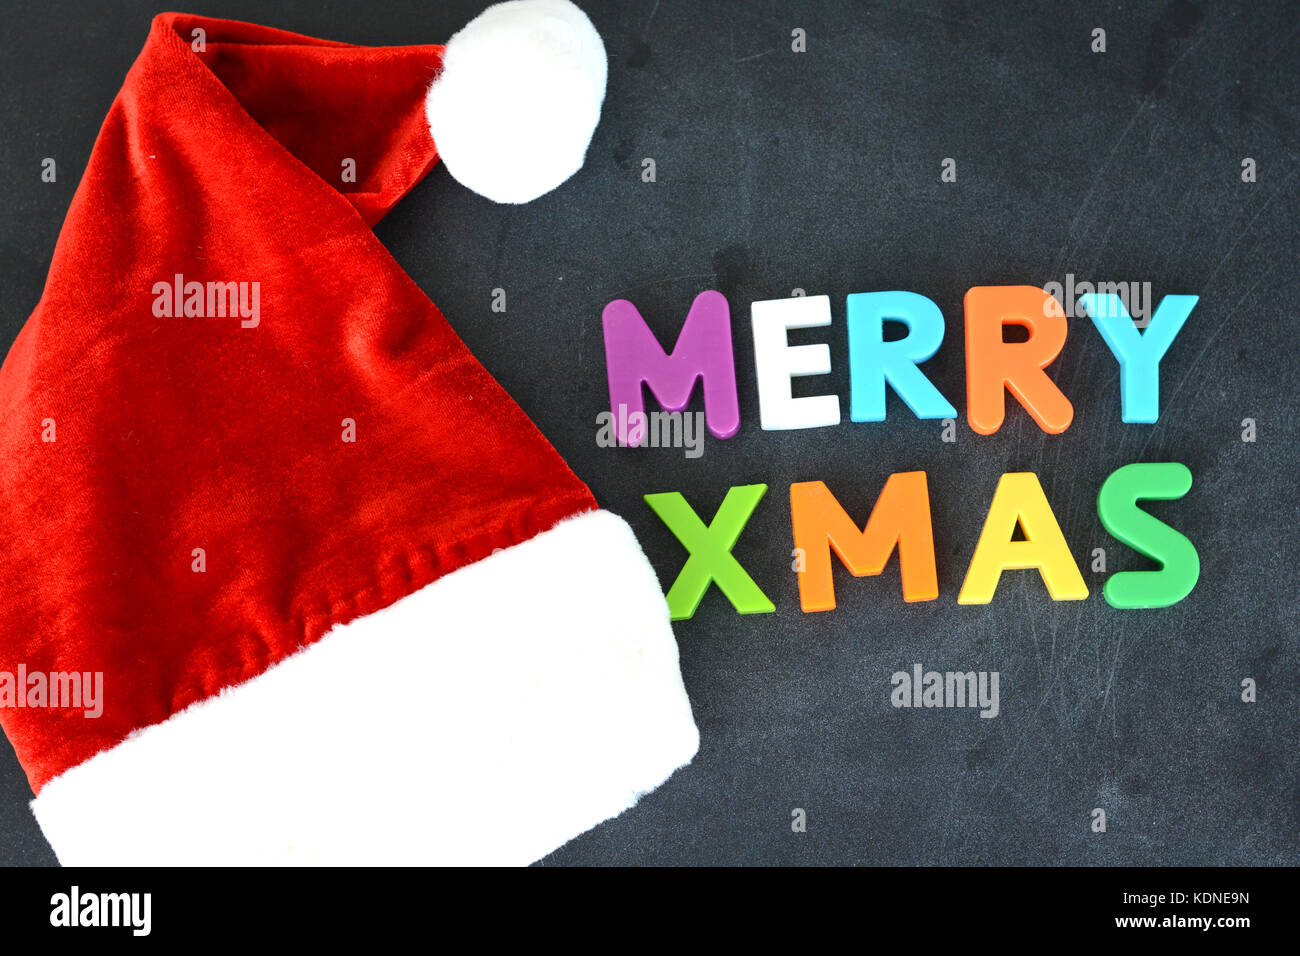 Merry Xmas colorful text with Santa’s red hat on dark background Stock Photo